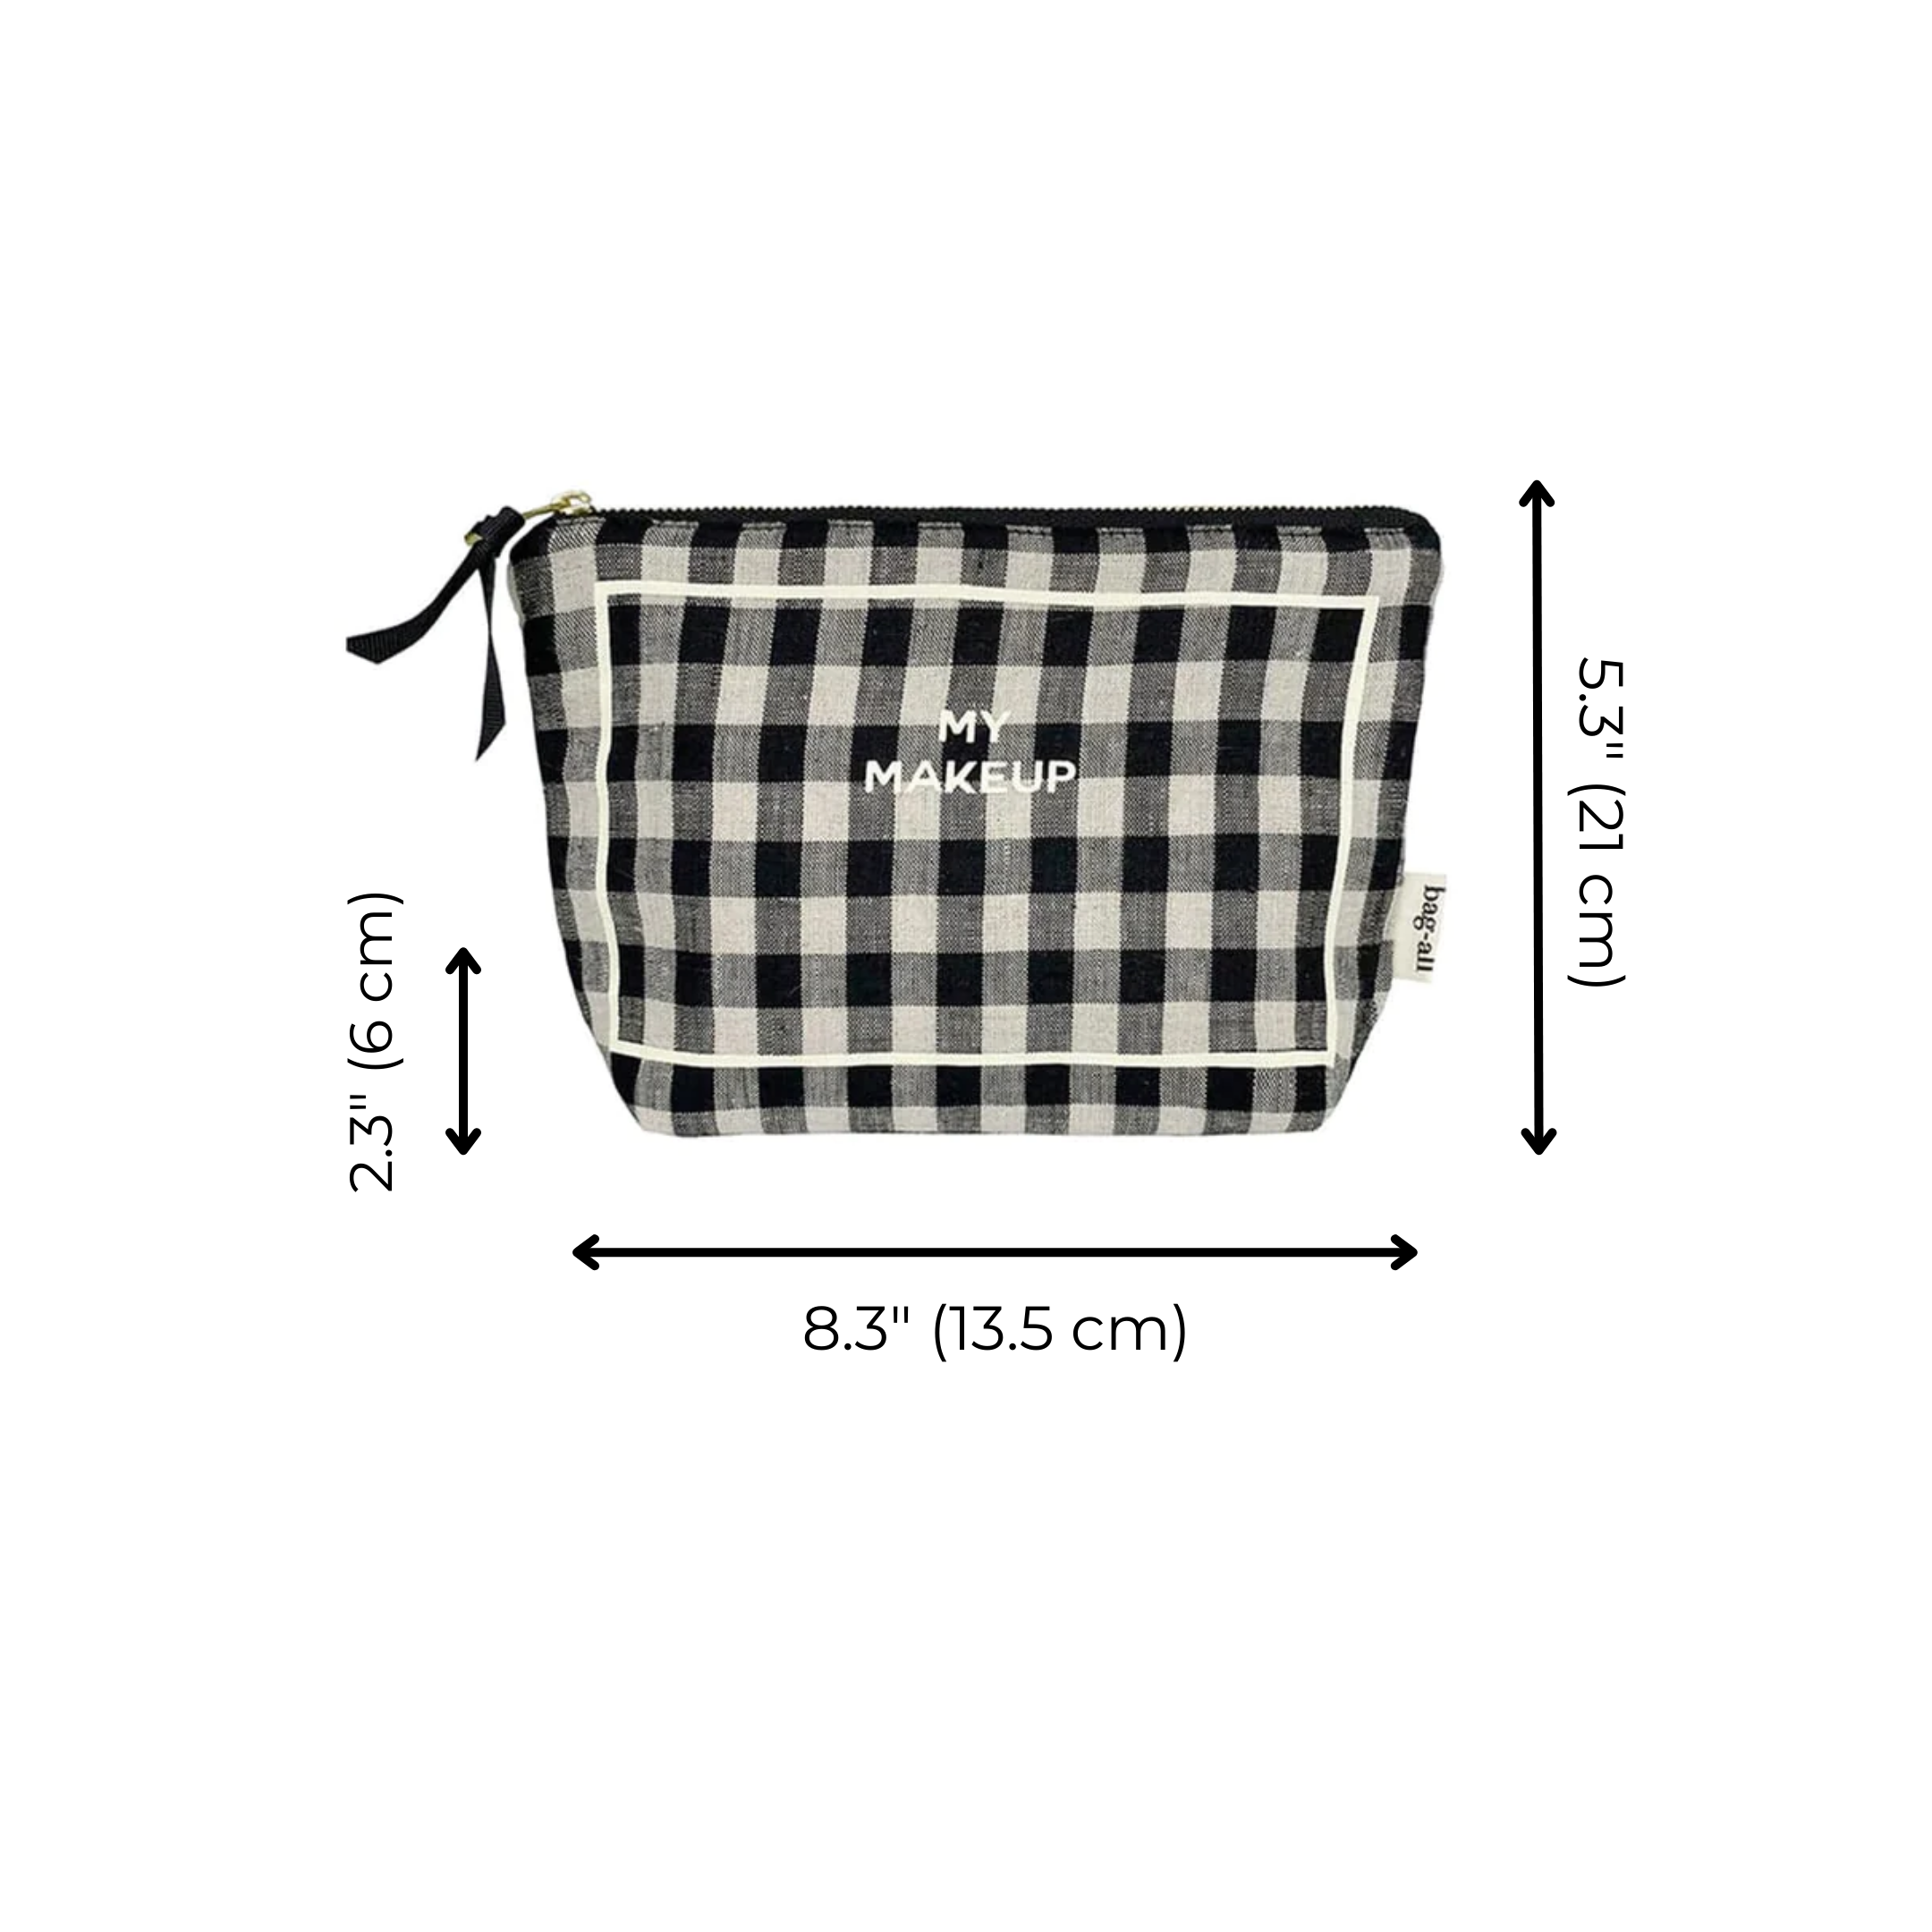 My Makeup Pouch, Coated Lining Gingham | Bag-all